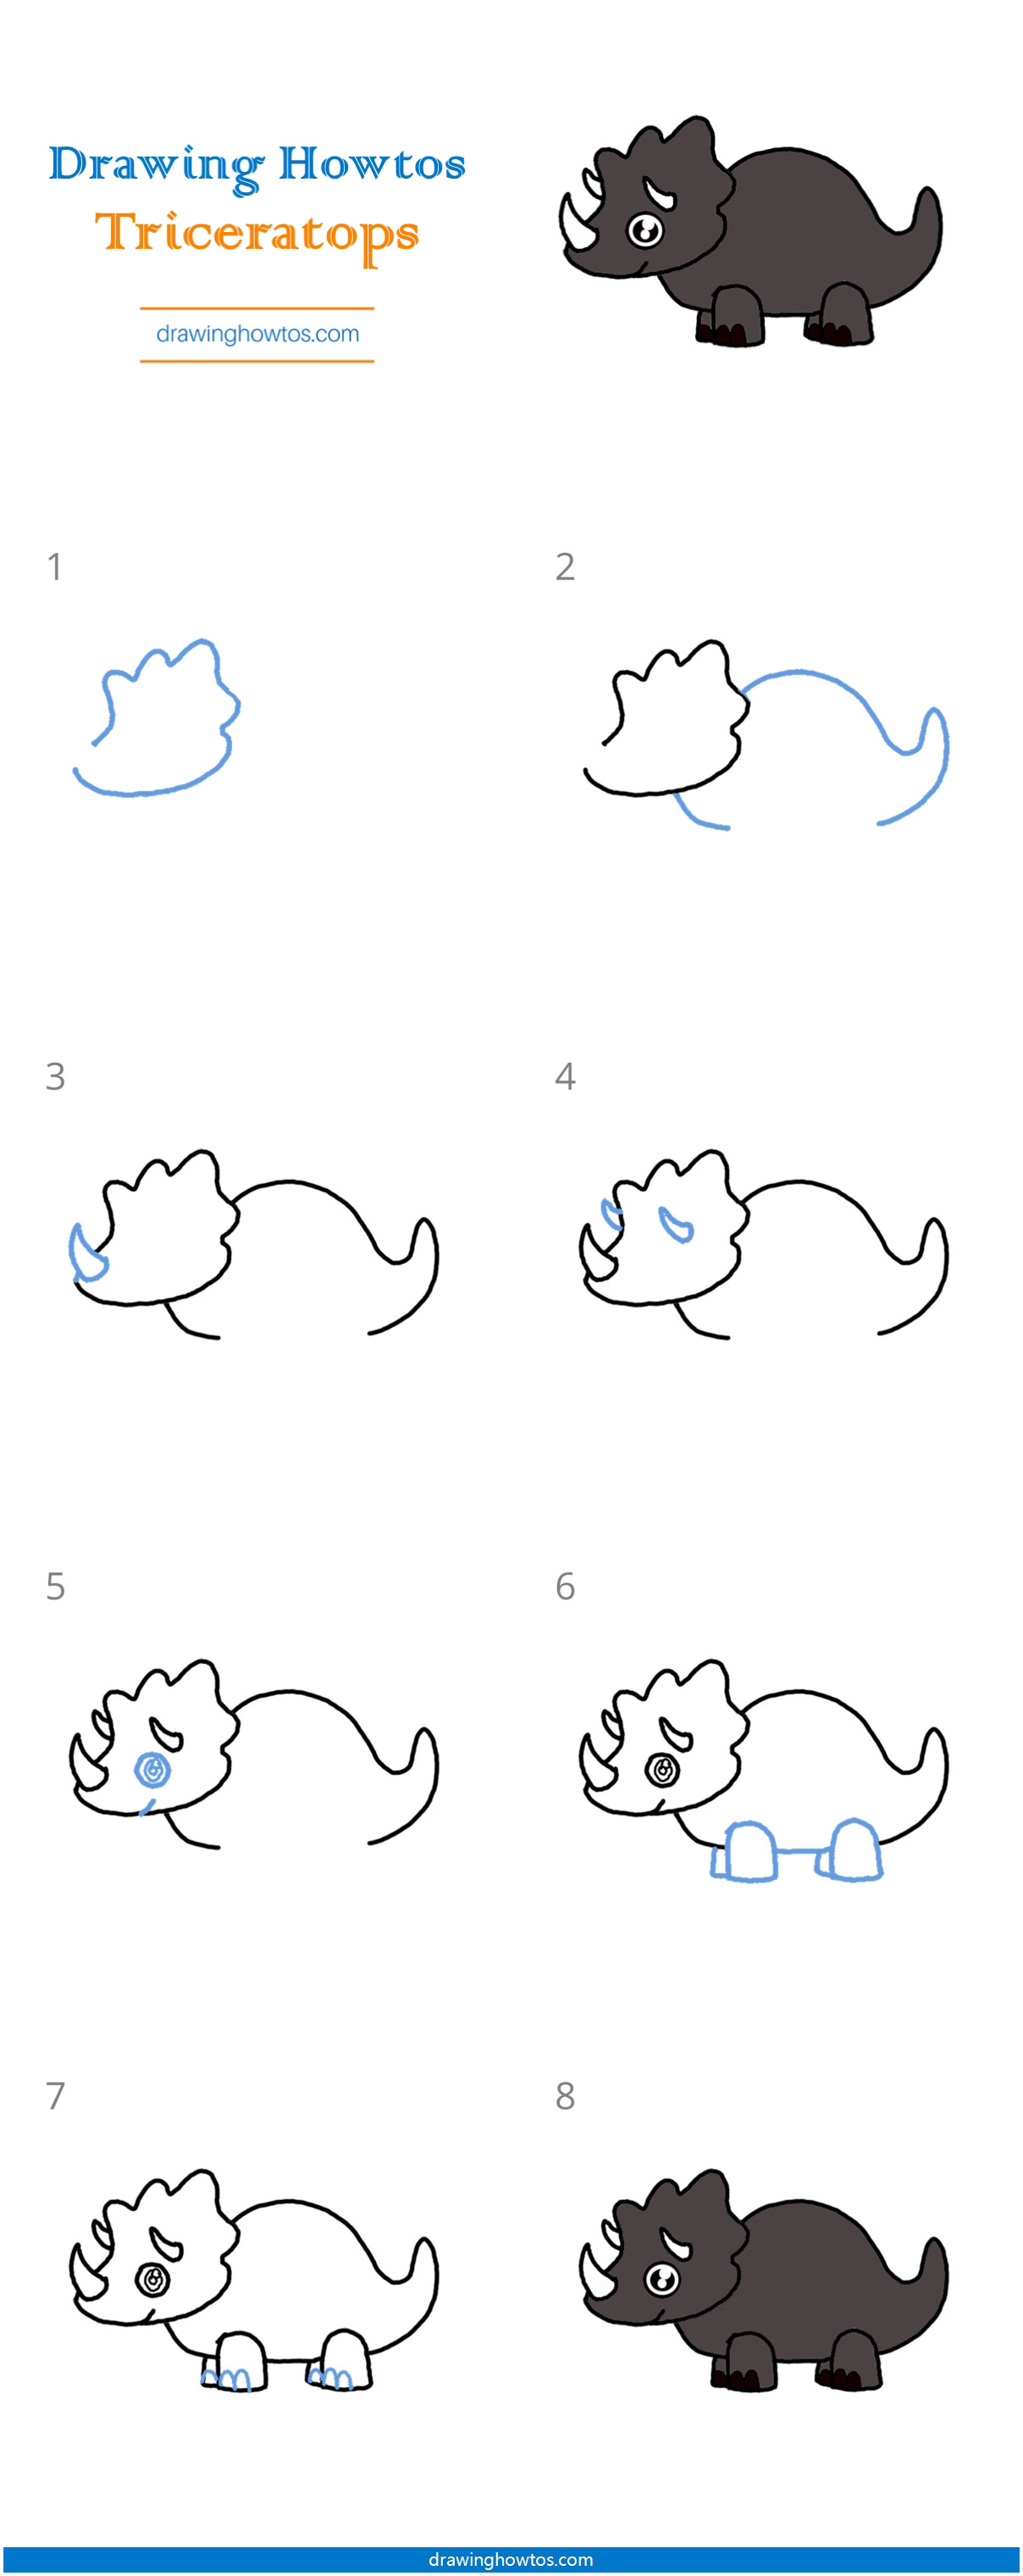 How to Draw a Triceratops Step by Step